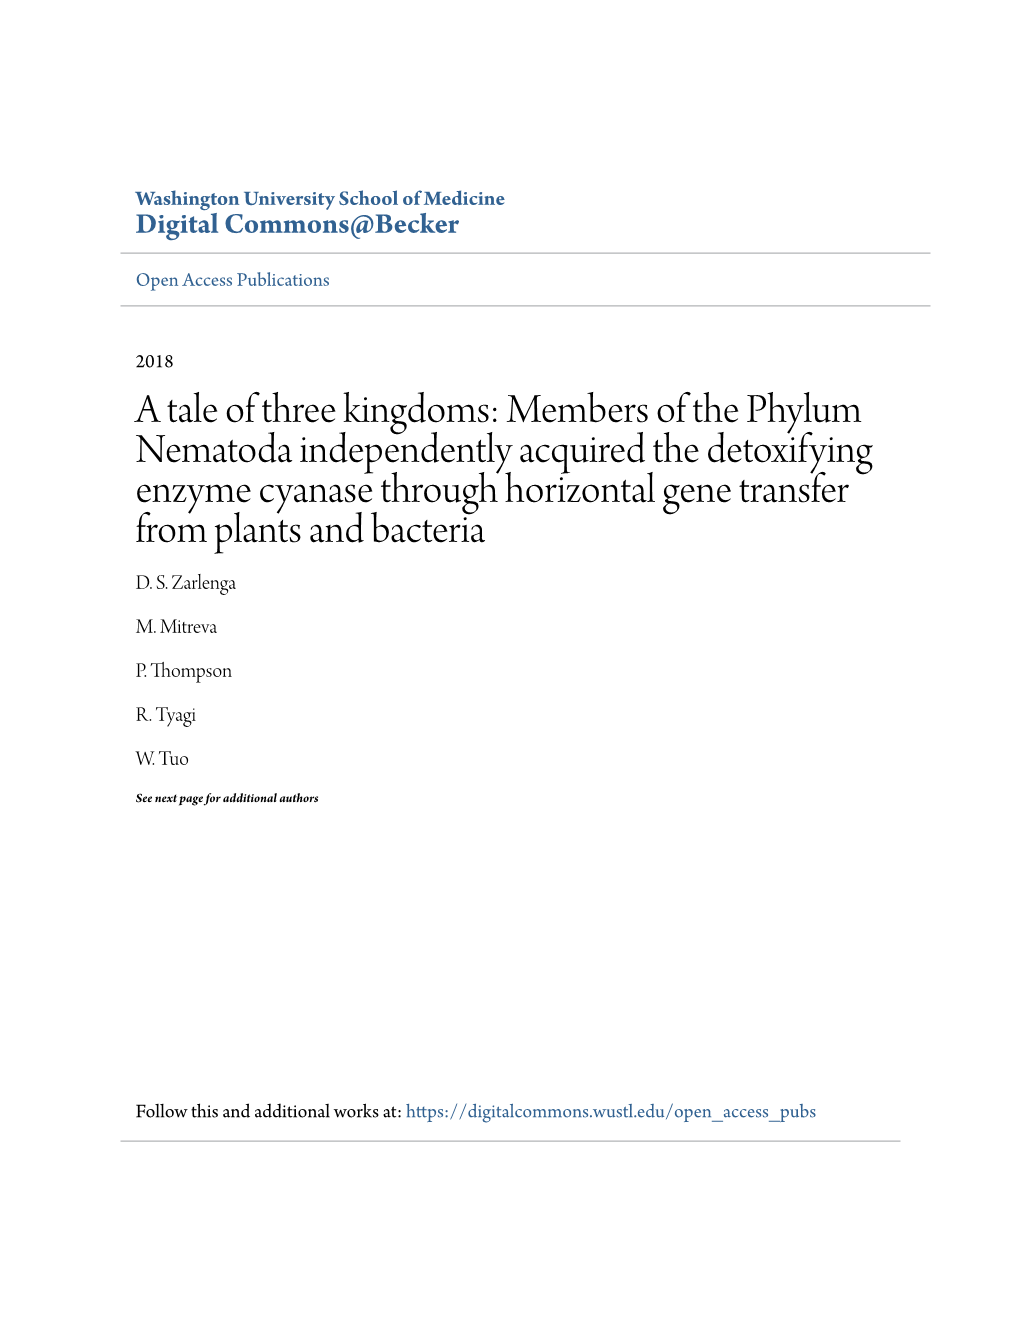 Members of the Phylum Nematoda Independently Acquired the Detoxifying Enzyme Cyanase Through Horizontal Gene Transfer from Plants and Bacteria D